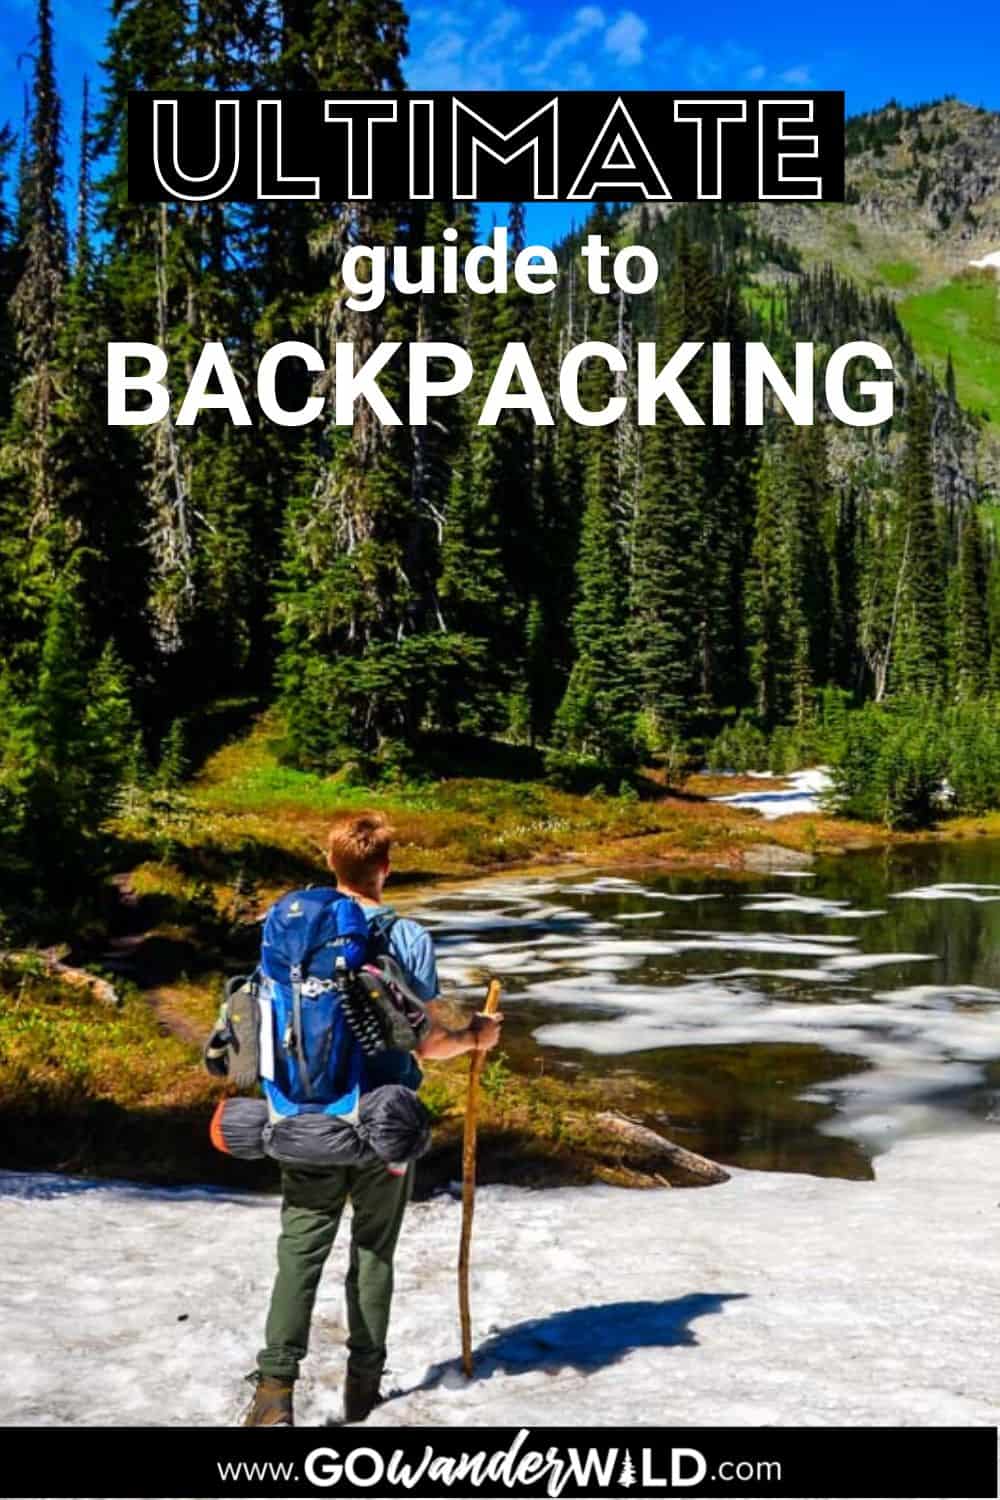 Backpacking for Beginners: Ultimate Guide - Go Wander Wild